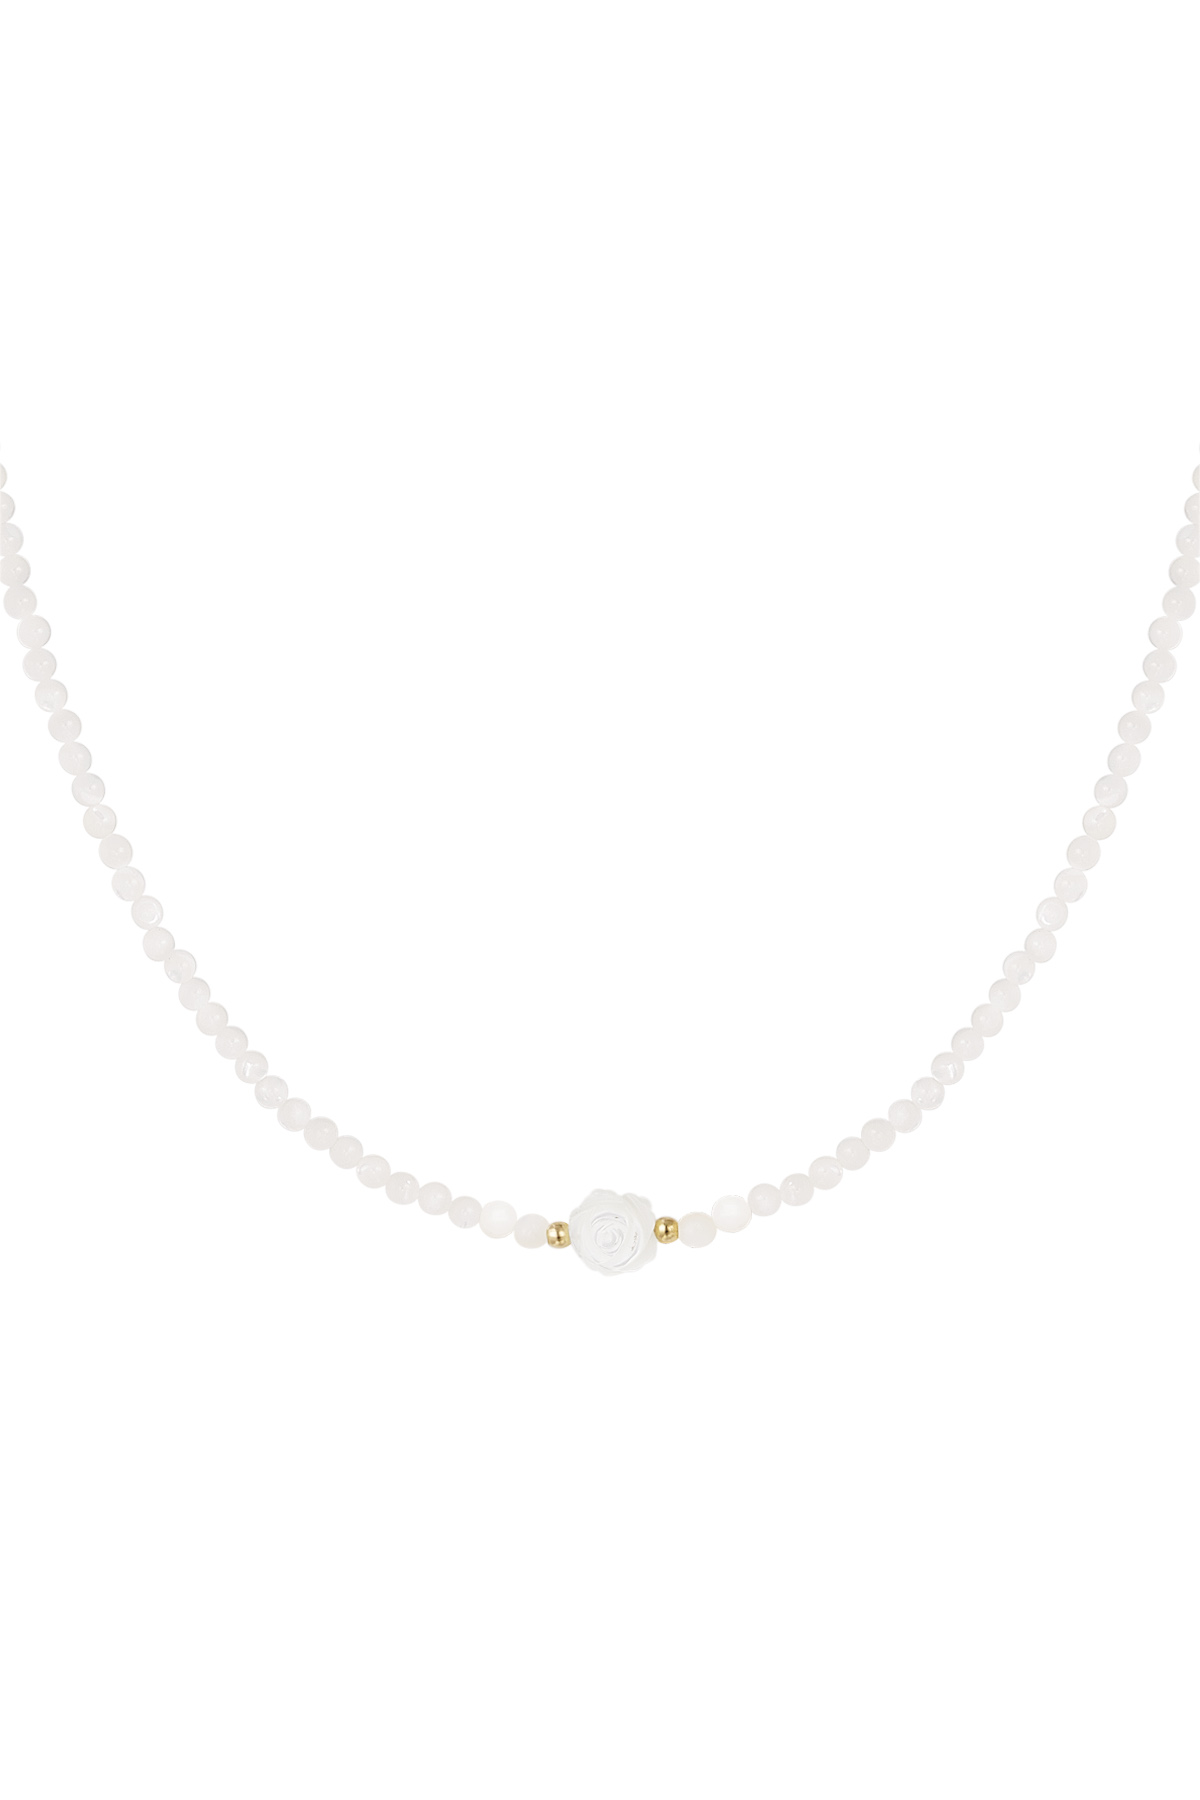 Or / Collier perles blanches - blanc/or Image24